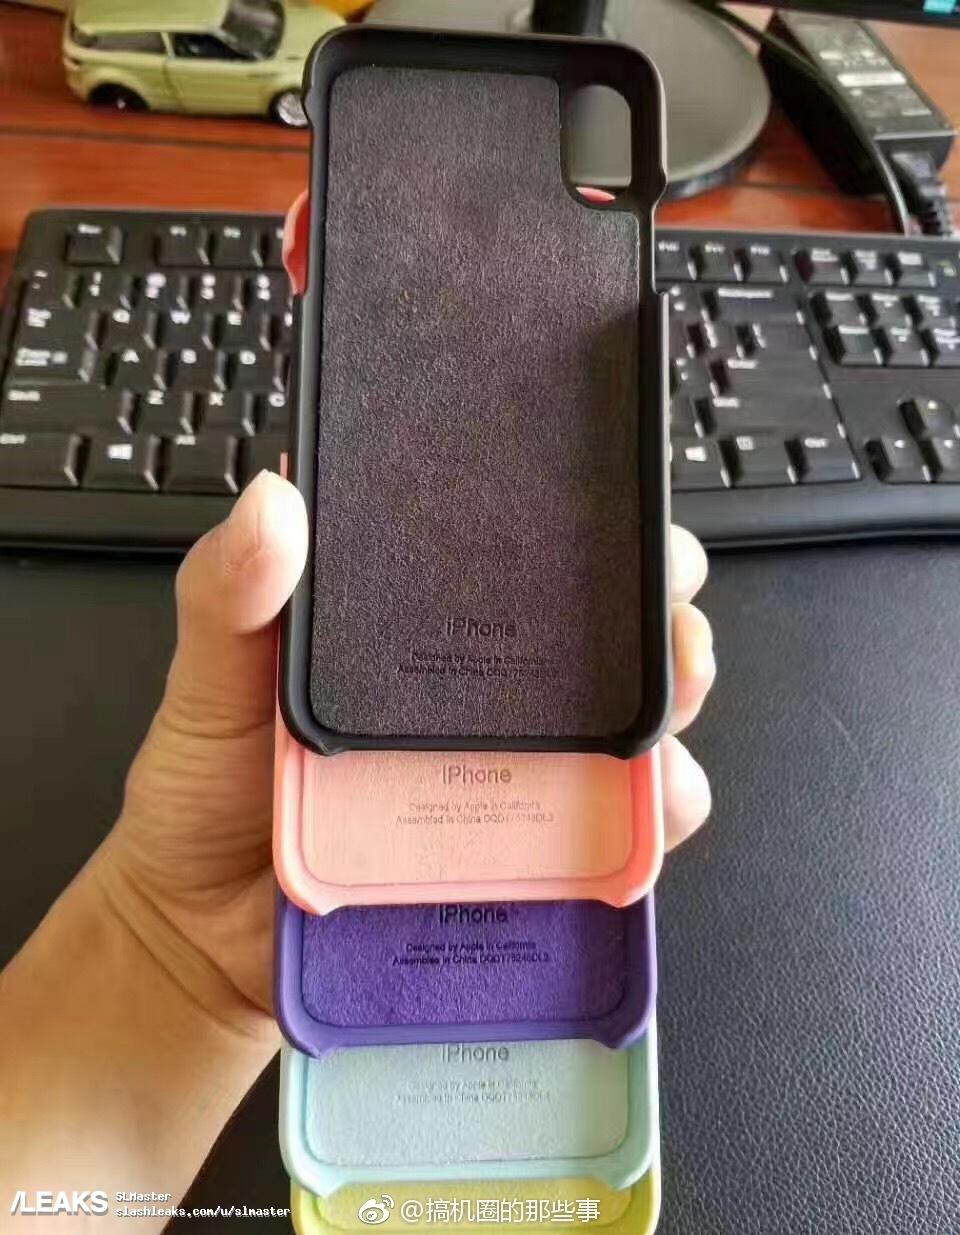 iPhone 8 Apple covers 1